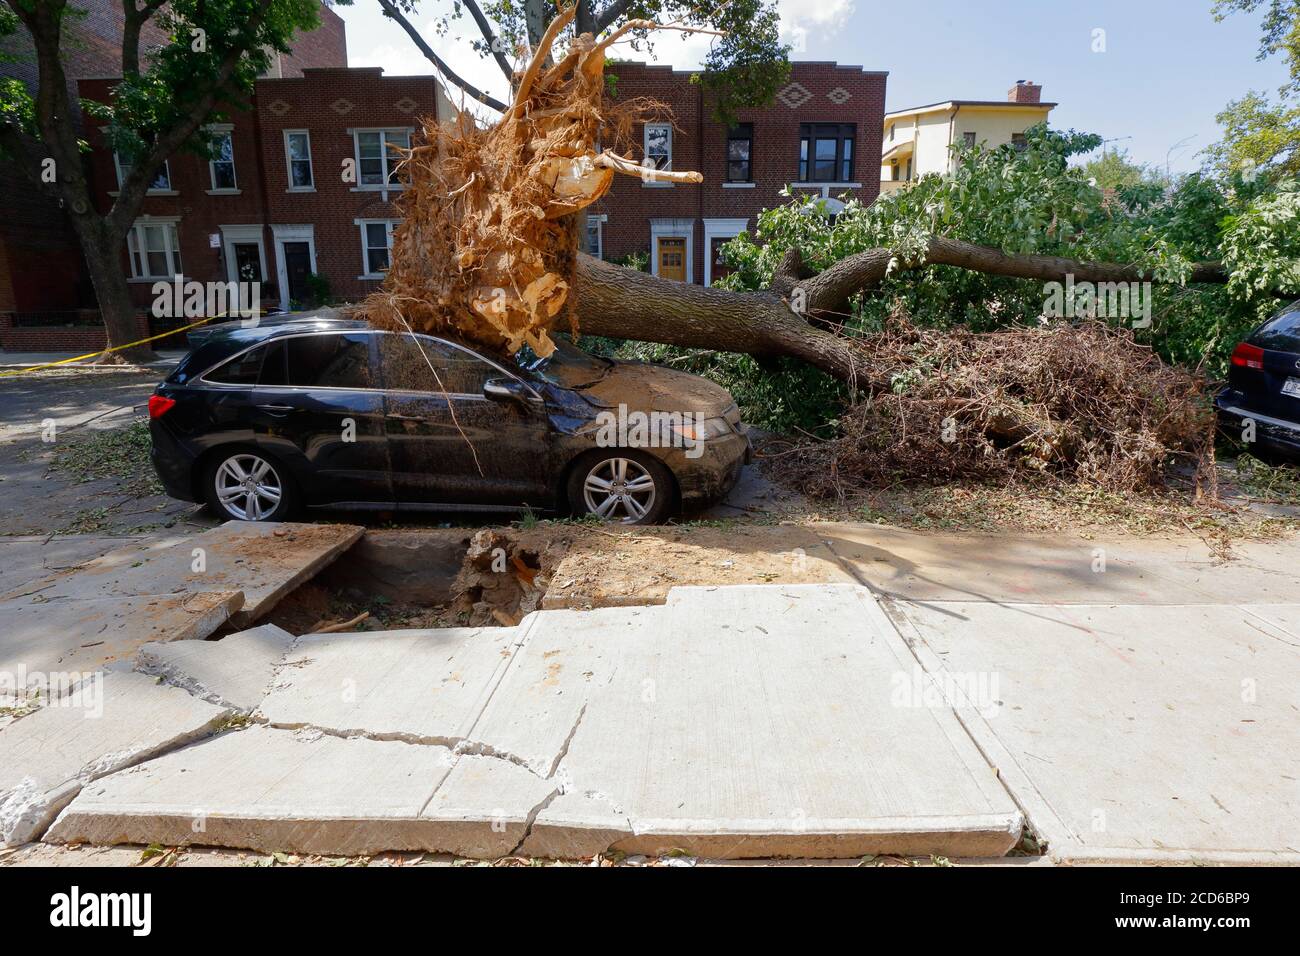 A black car damaged by an uprooted tree toppled by strong winds from Tropical Storm Isaias, New York City, August 5, 2020. Stock Photo